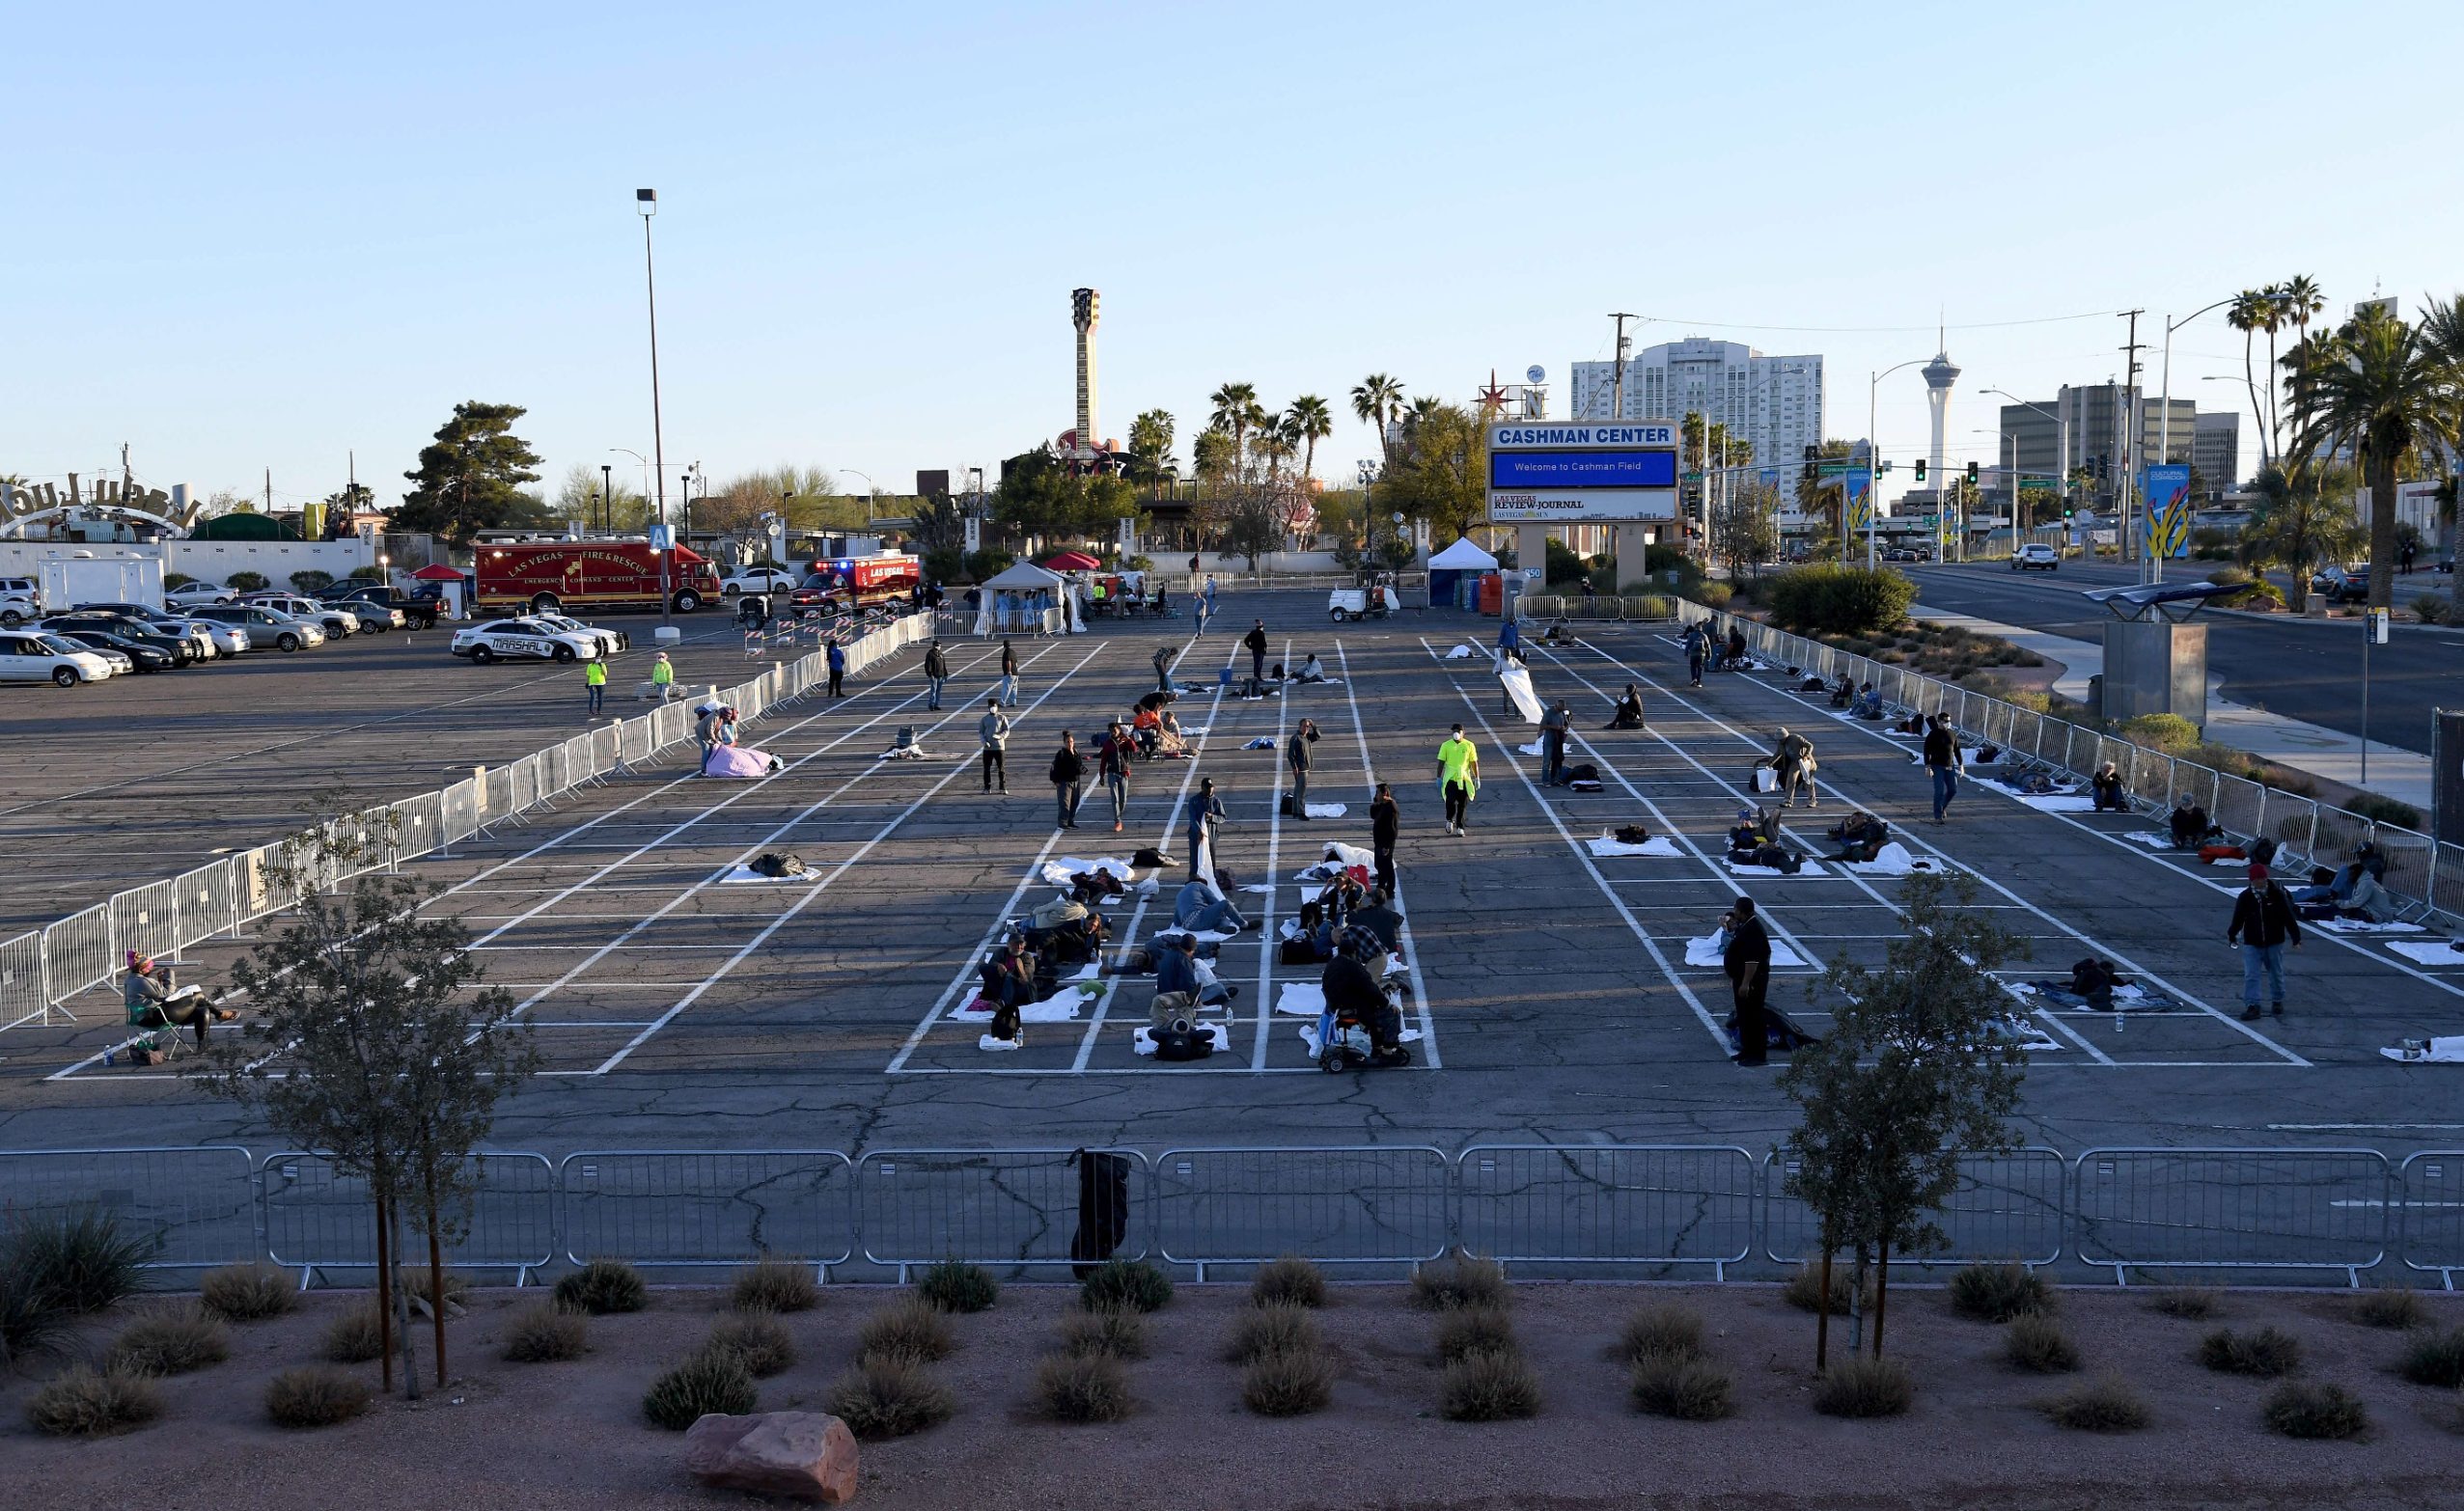 LAS VEGAS, NEVADA - MARCH 30: People arrive at a temporary homeless shelter set up in a parking lot at Cashman Center on March 30, 2020 in Las Vegas, Nevada. Catholic Charities of Southern Nevada was closed last week after a homeless man who used their services tested positive for the coronavirus, leaving about 500 people with no overnight shelter. The city of Las Vegas, Clark County and local homeless providers plan to operate the shelter through April 3rd when it is anticipated that the Catholic Charities facility will be back open. The city is also reserving the building spaces at Cashman Center in case of an overflow of hospital patients. The World Health Organization declared the coronavirus (COVID-19) a global pandemic on March 11th.   Ethan Miller/Getty Images/AFP
== FOR NEWSPAPERS, INTERNET, TELCOS & TELEVISION USE ONLY ==